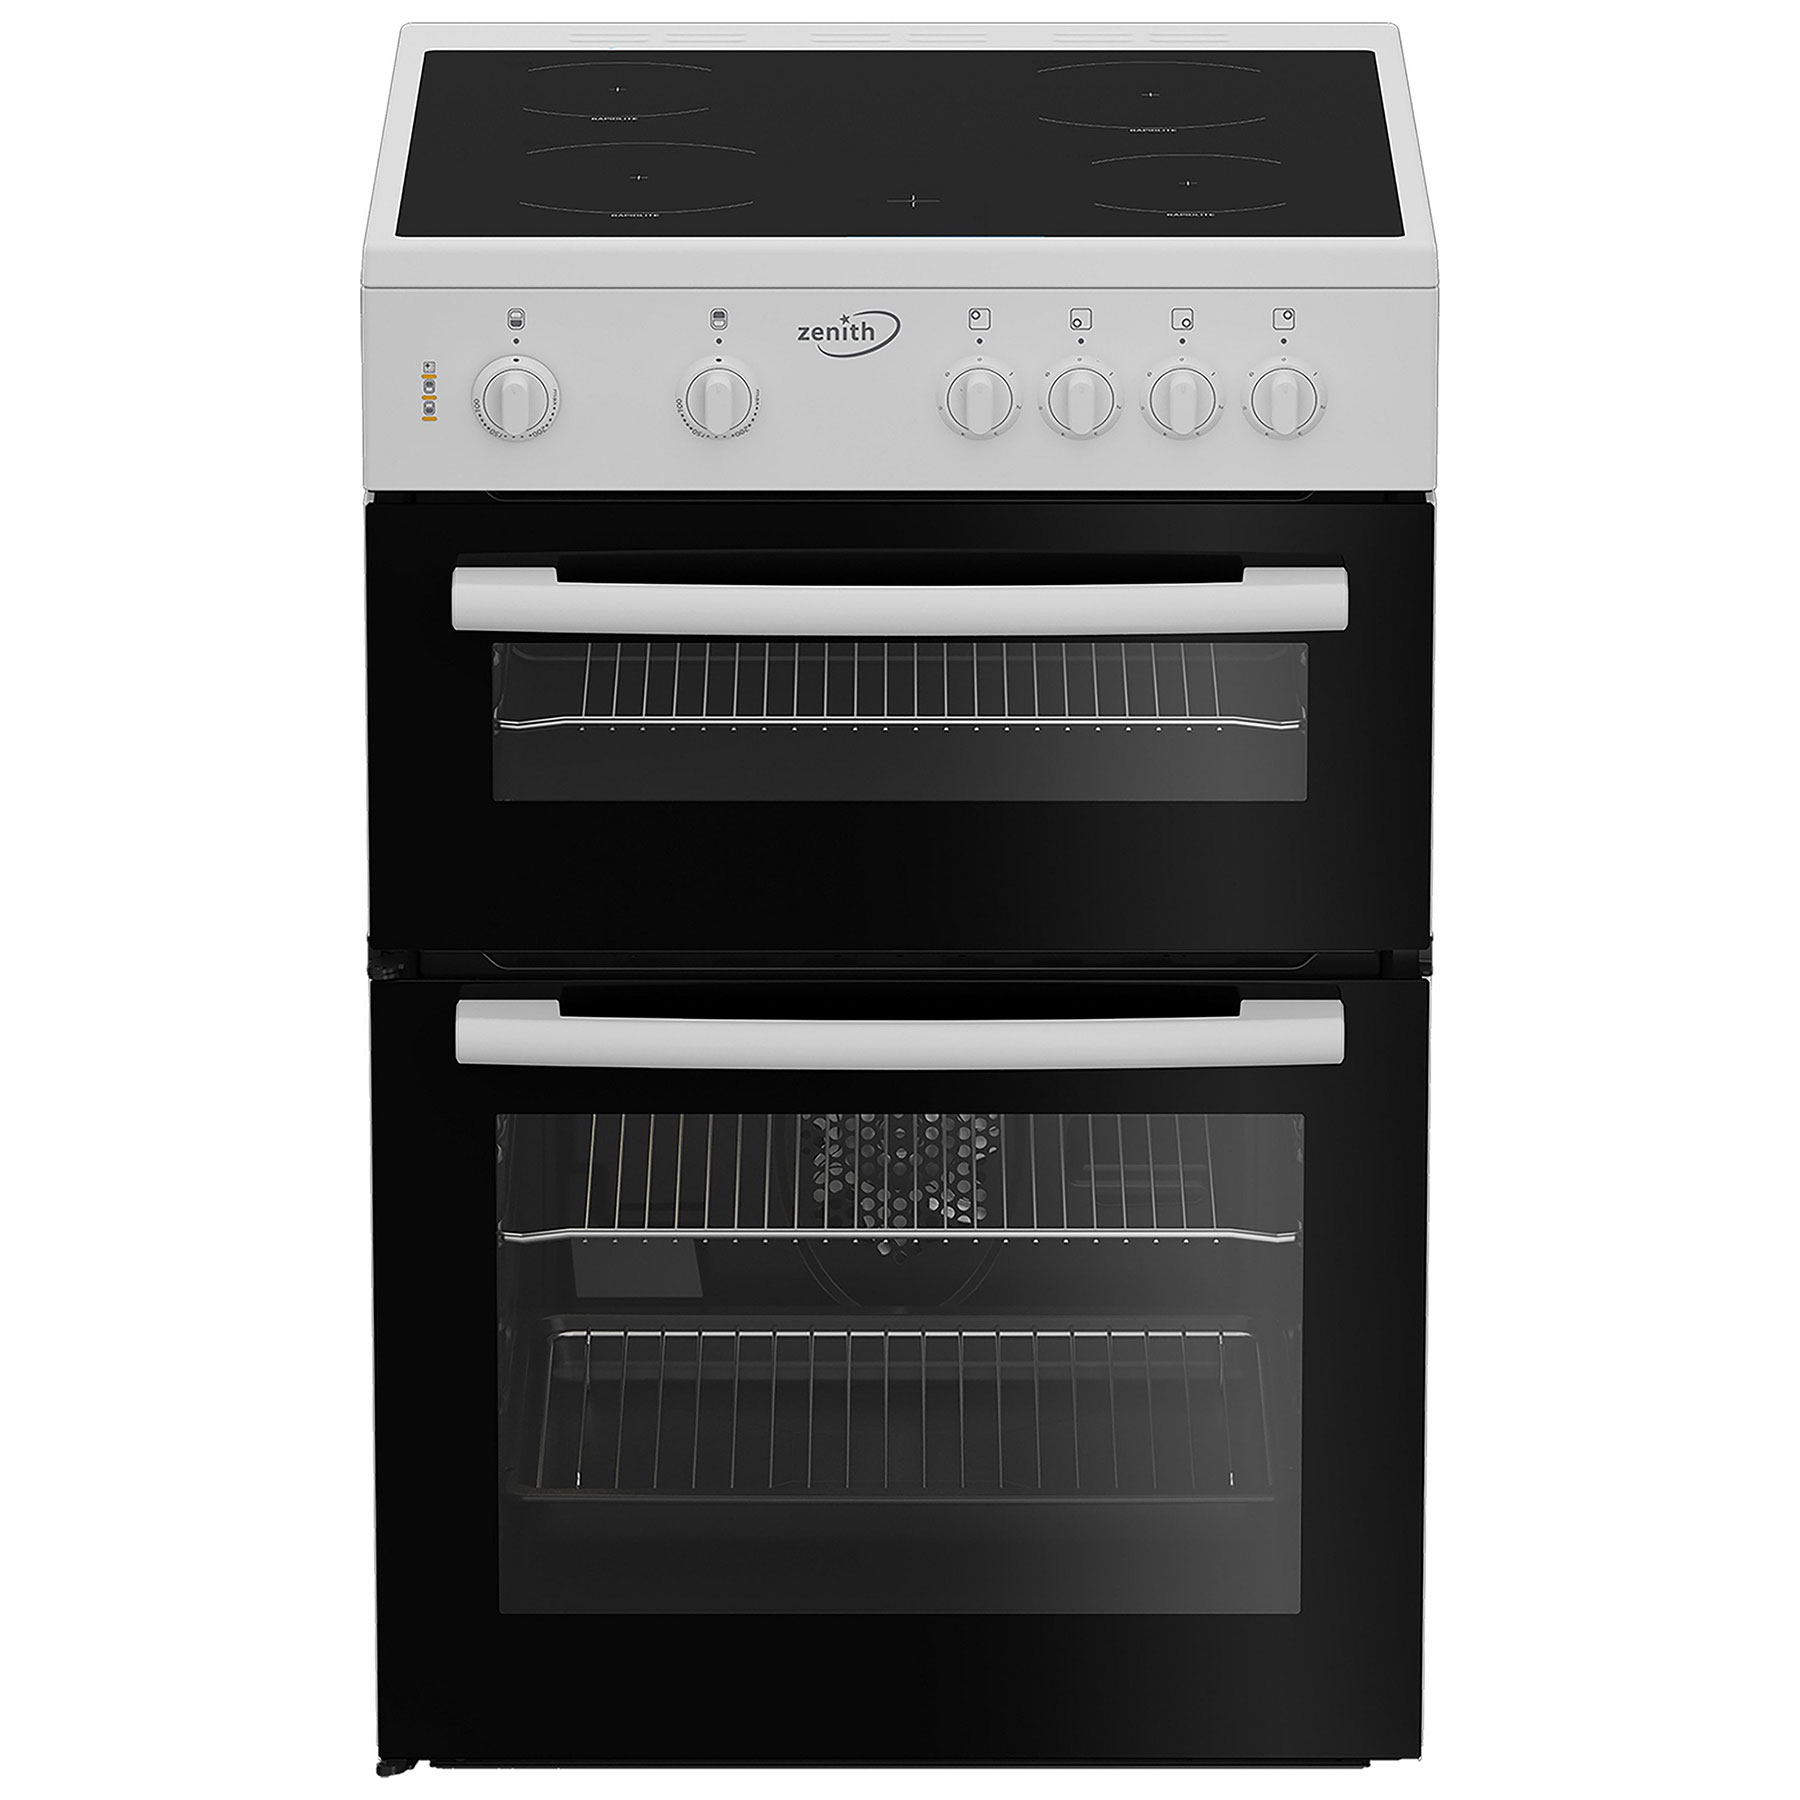 Image of Zenith ZE605W 60cm Twin Cavity Electric Cooker in Ceramic Hob